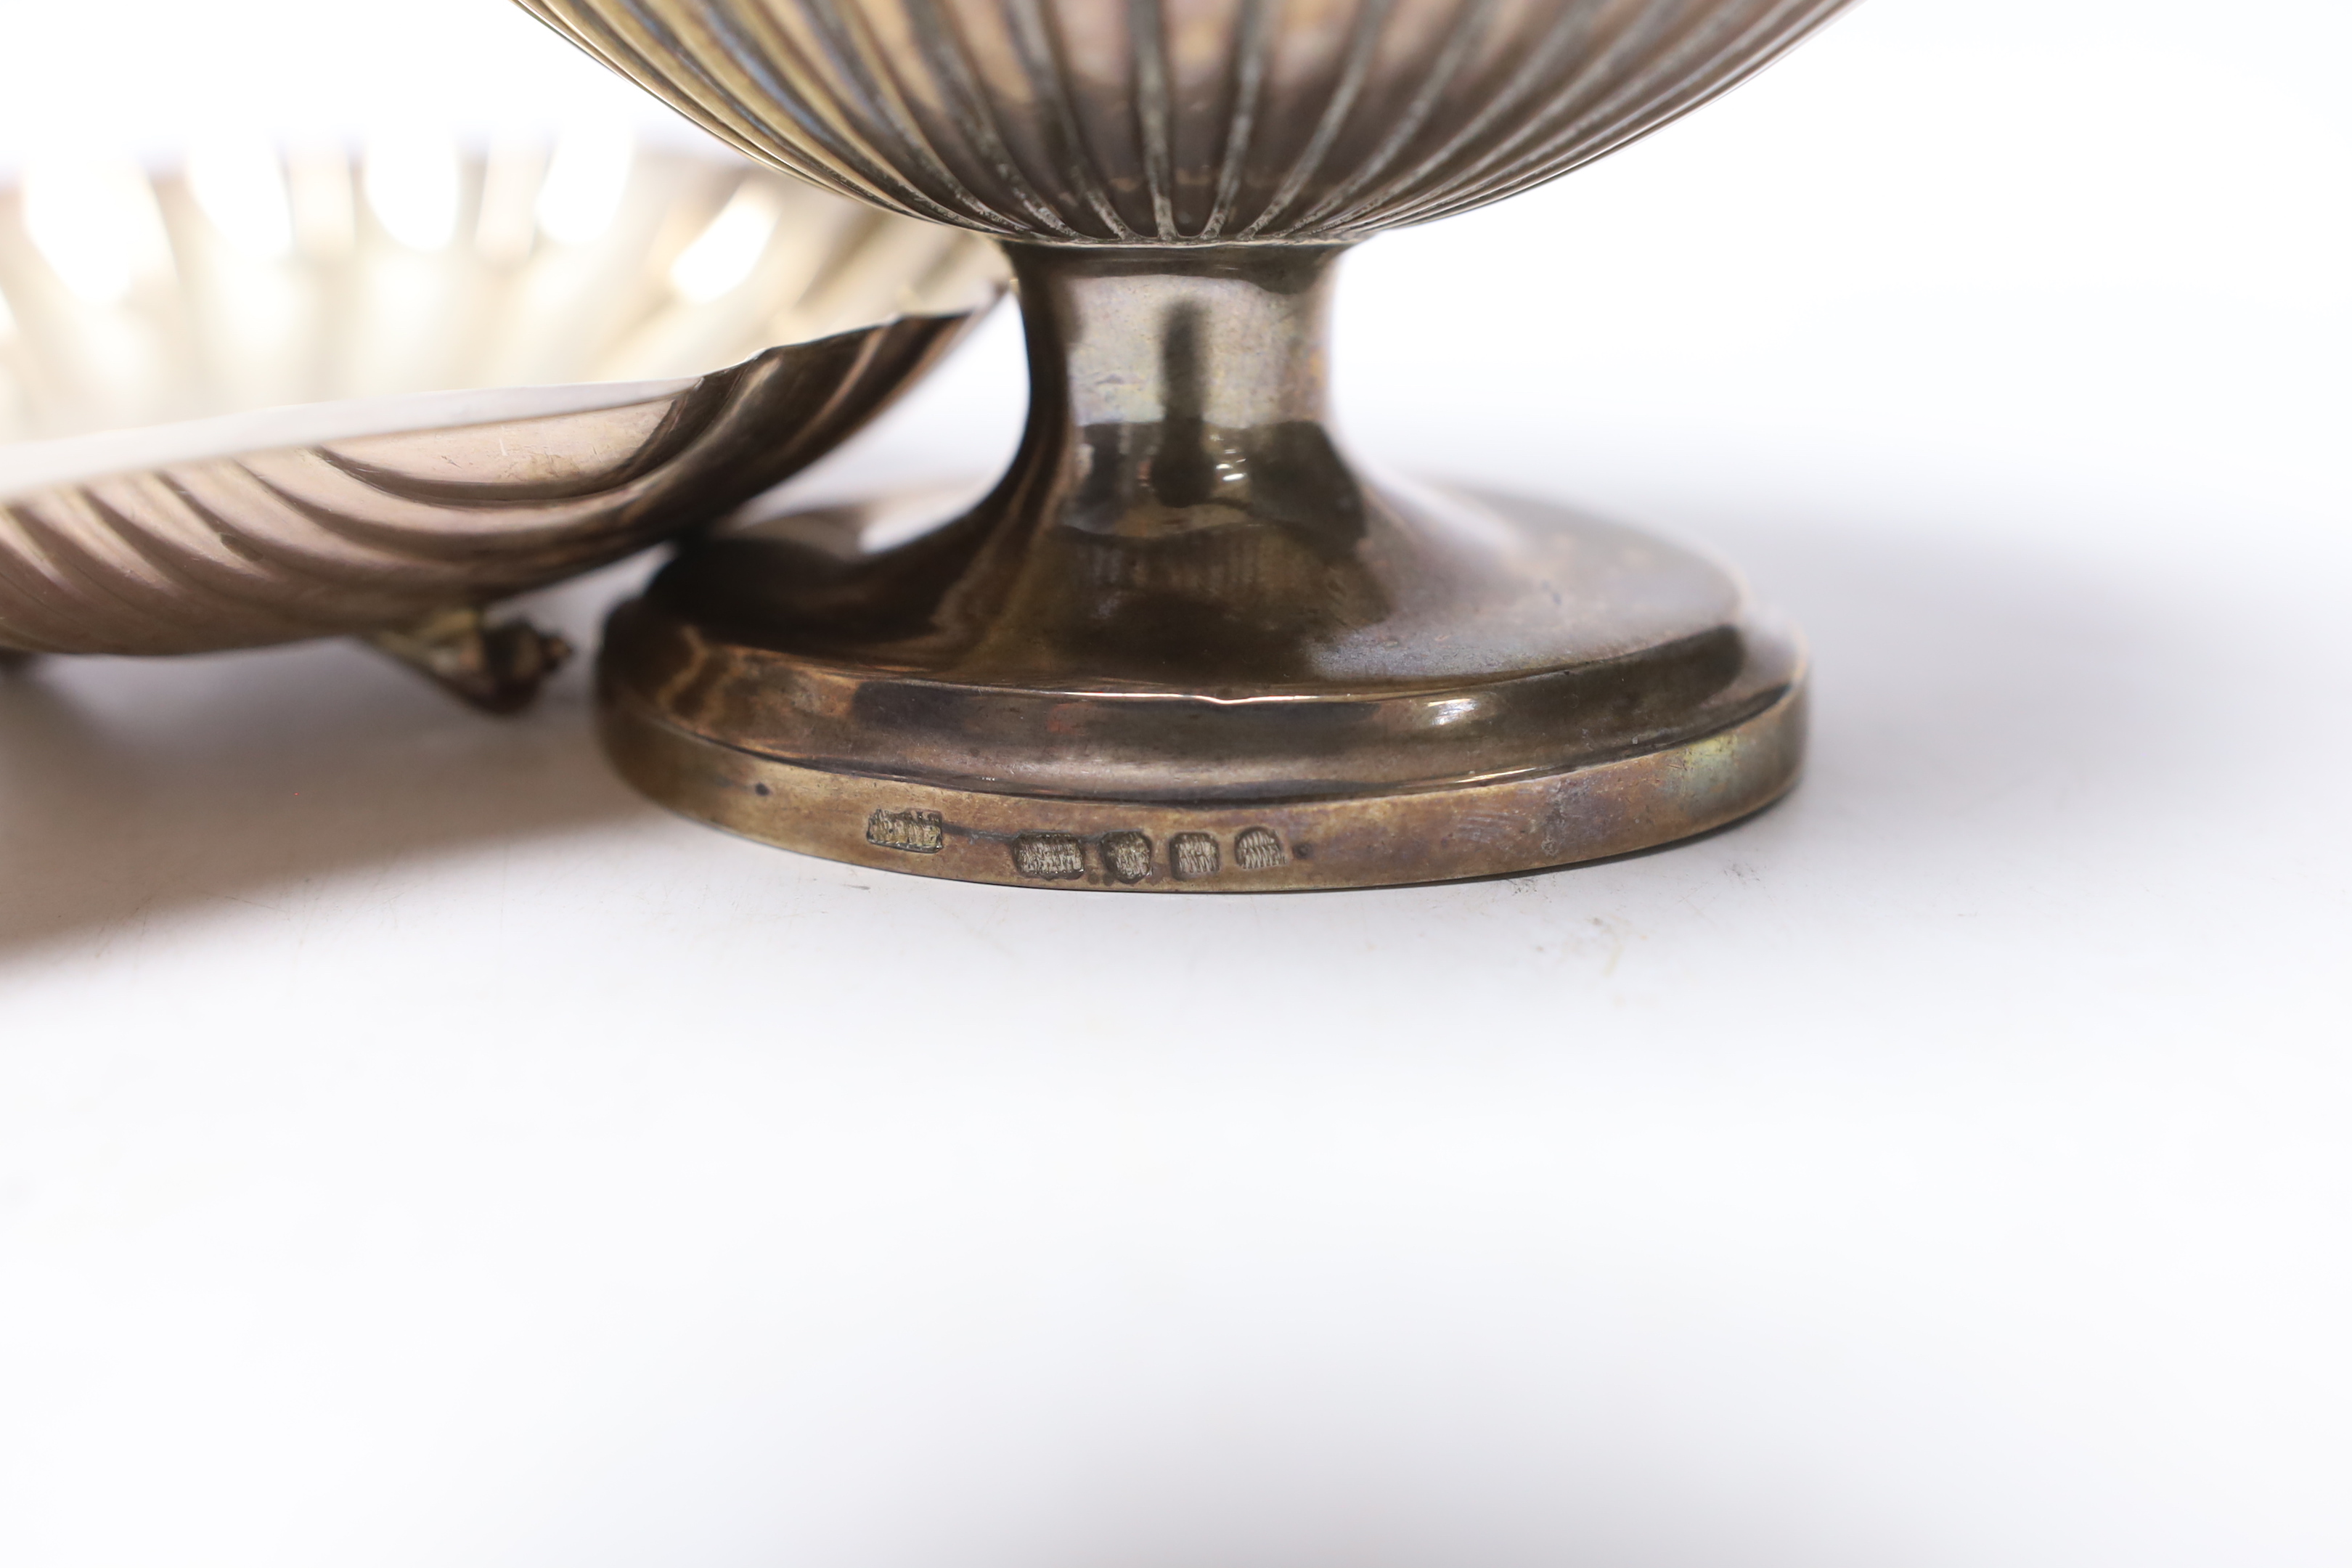 A modern silver sugar basket, London Assay Office marks for 1995 (cancelled earlier marks), an earlier silver butter shell and a sugar caster, 13.7oz.